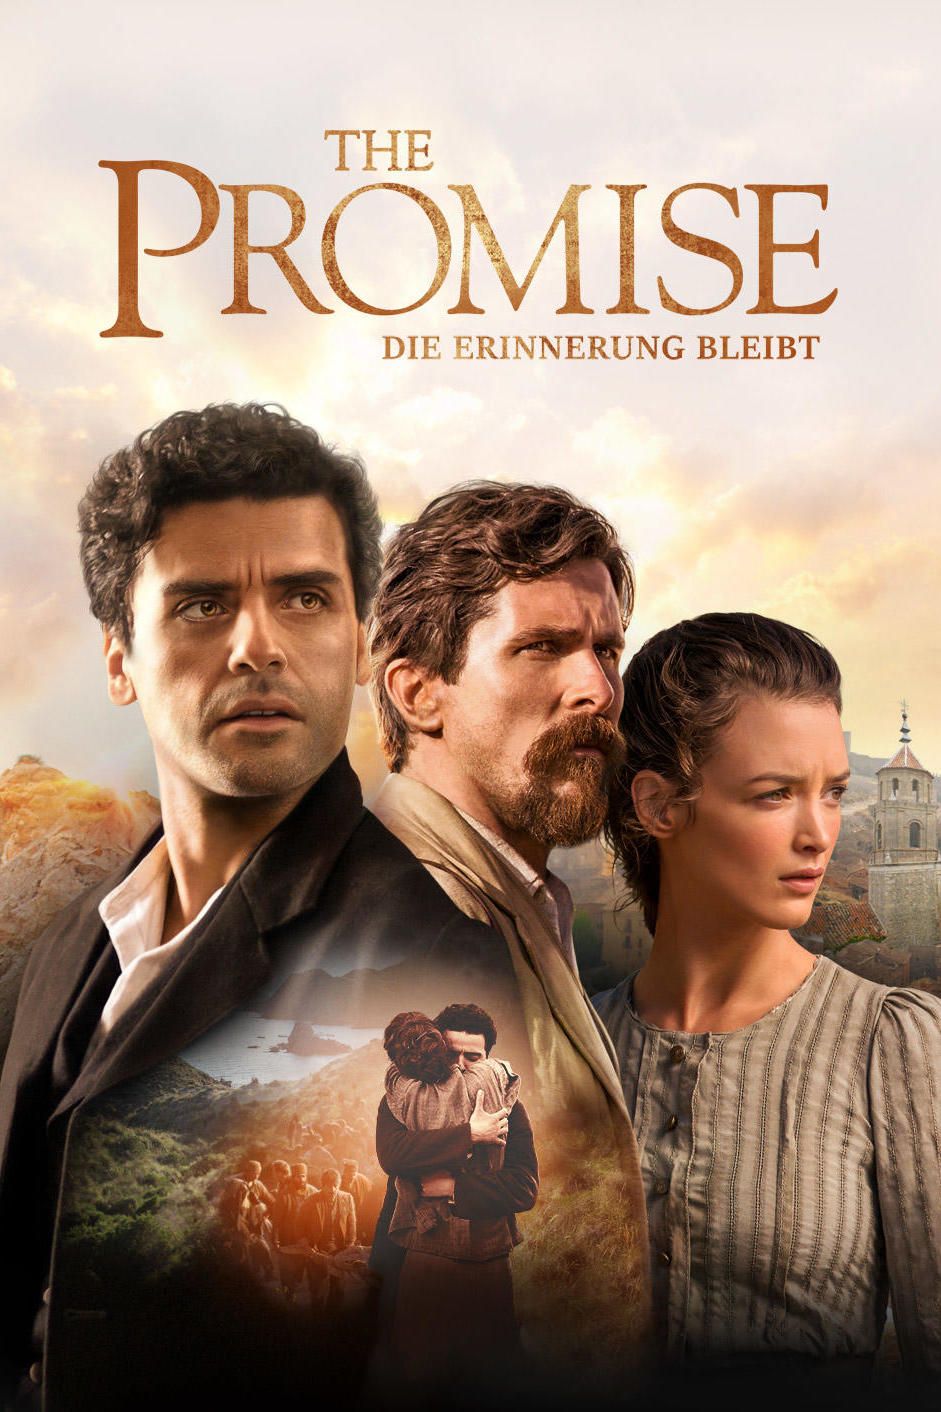 The Promise (2016) Movie Information & Trailers